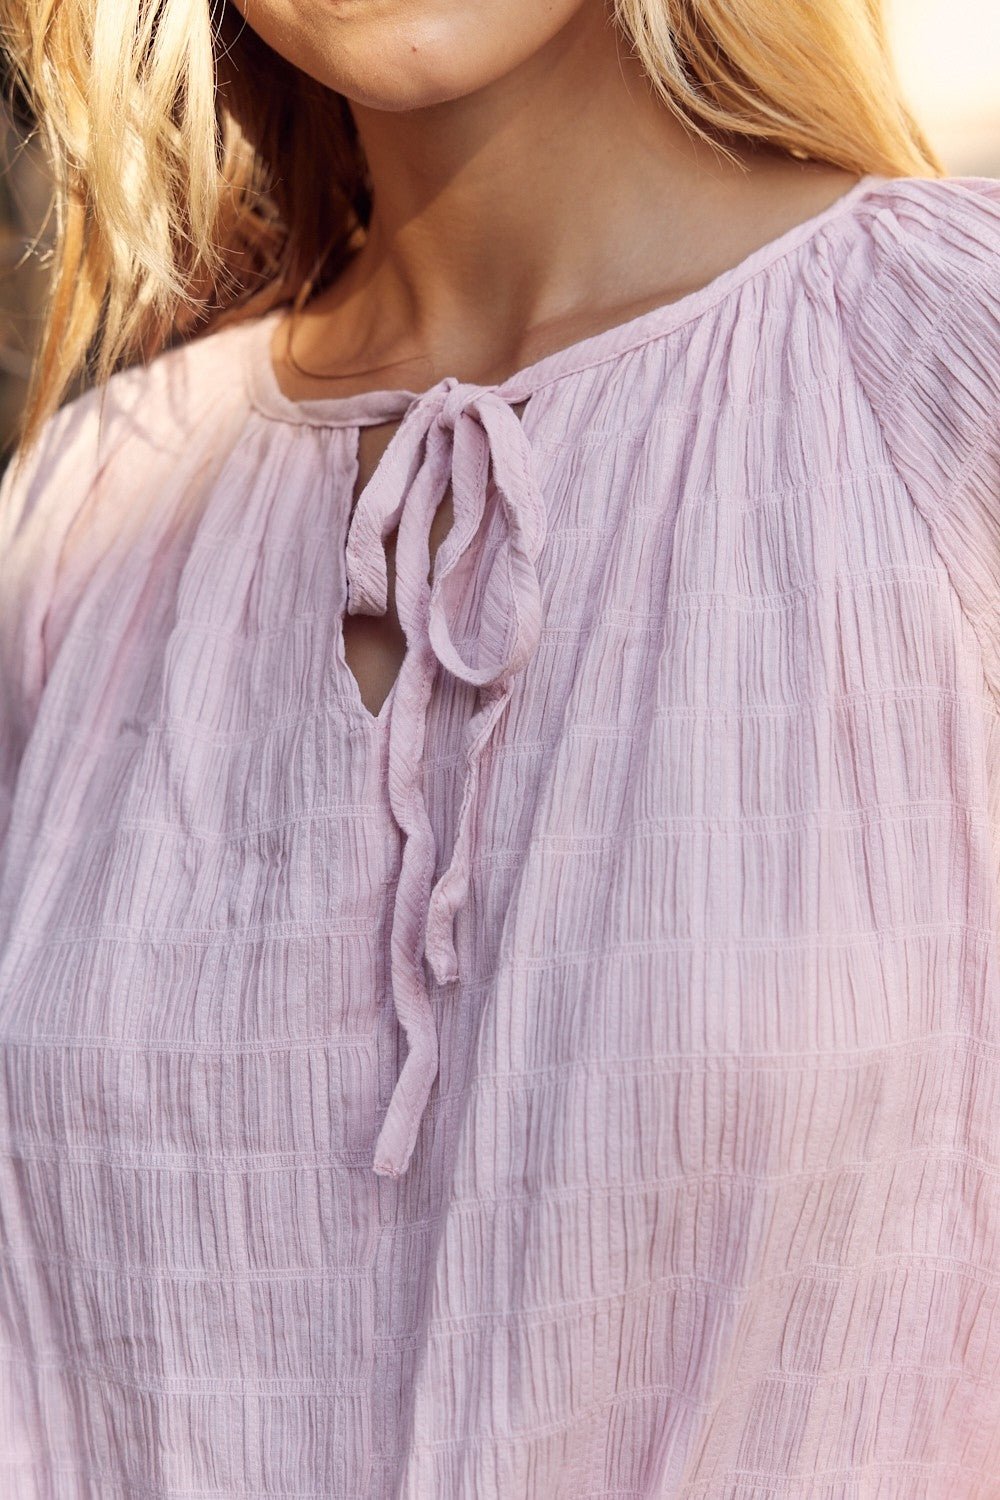 Textured Tie Neck Blouse in Dusty PinkBlouseIN FEBRUARY